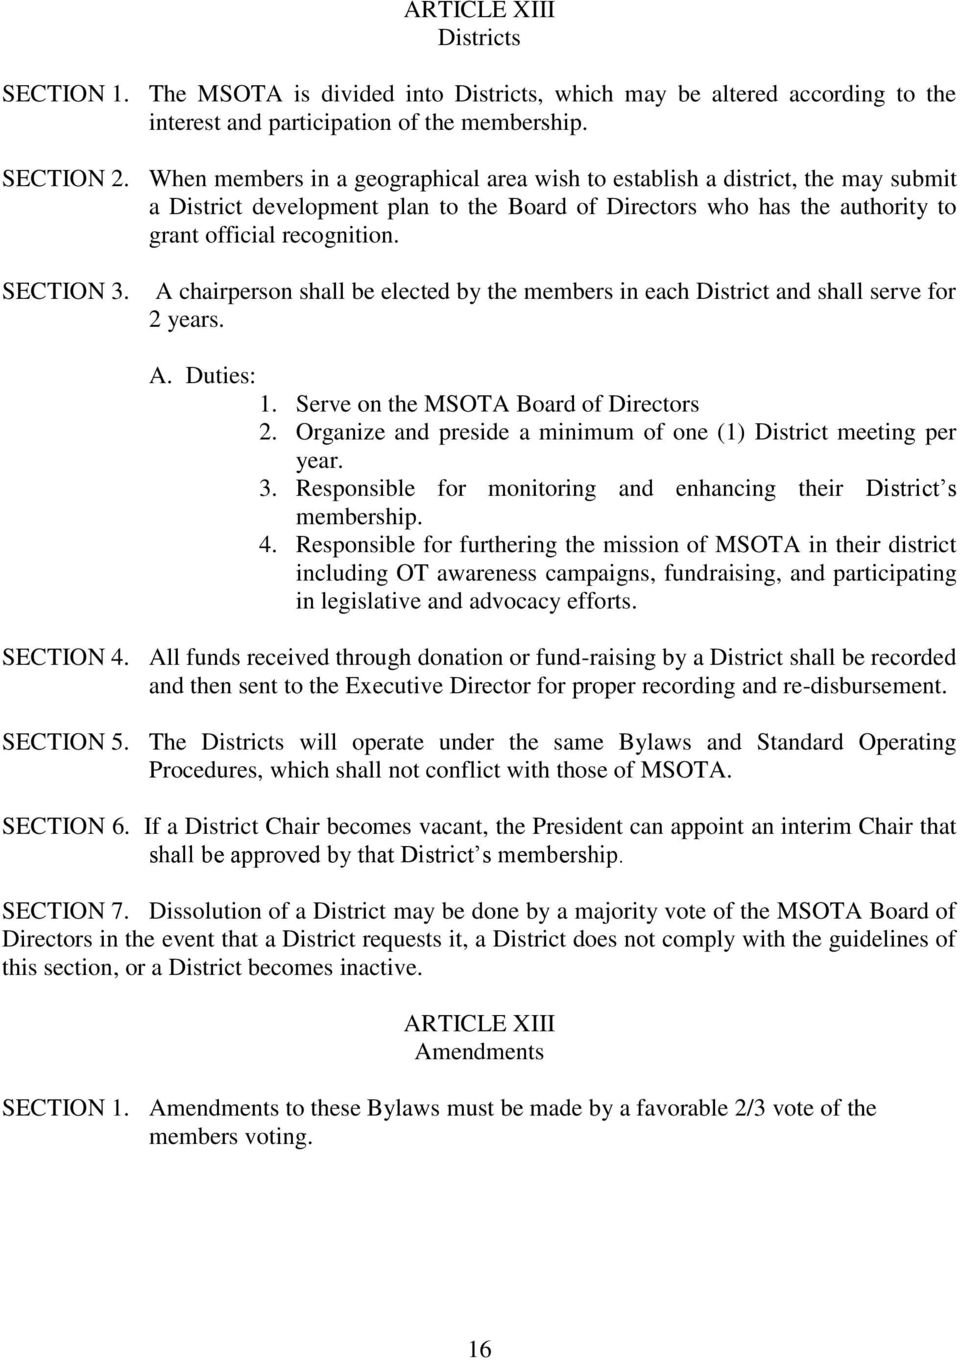 A chairperson shall be elected by the members in each District and shall serve for 2 years. A. Duties: 1. Serve on the MSOTA Board of Directors 2.